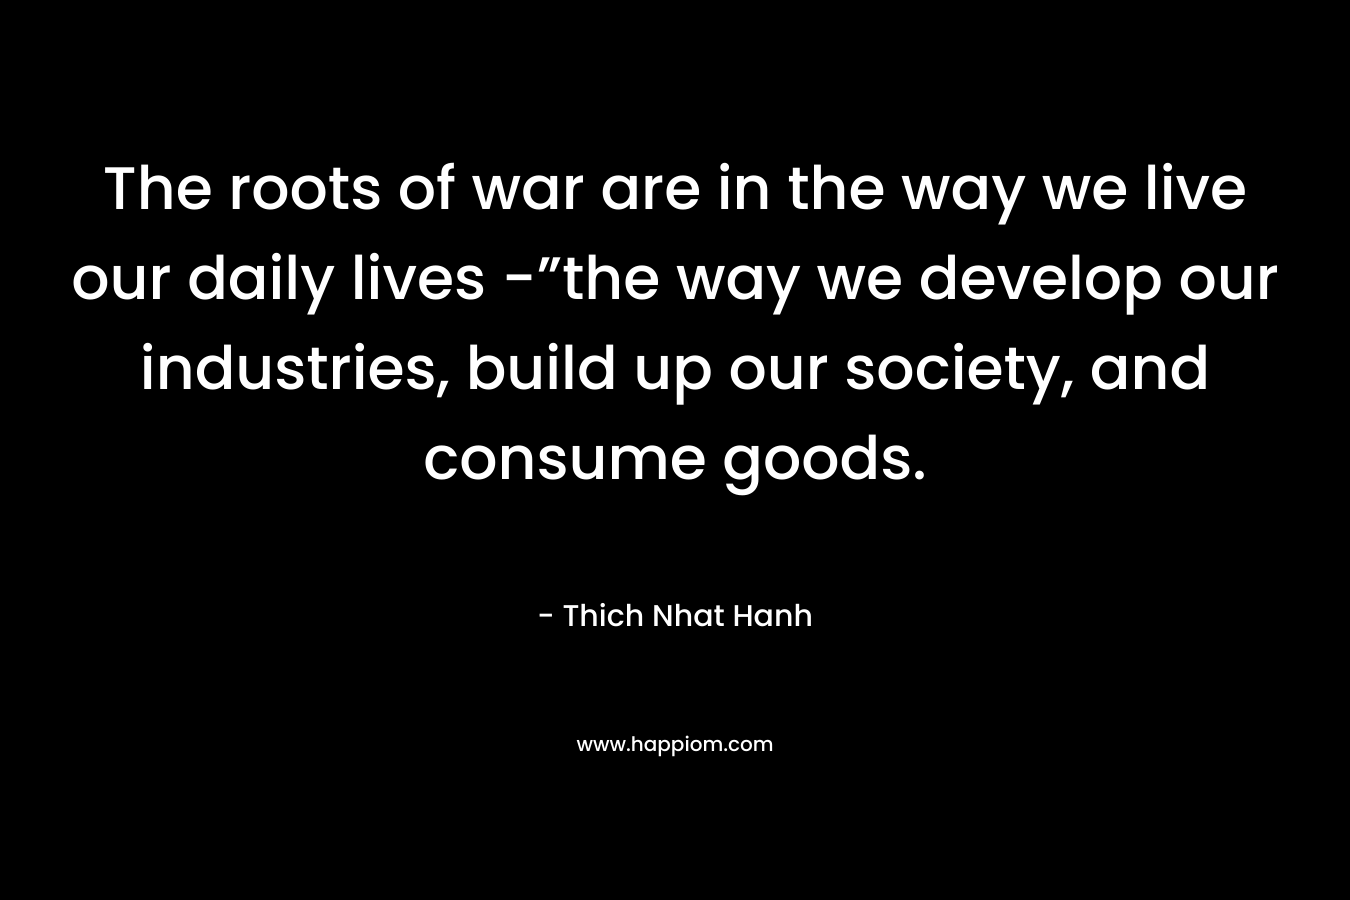 The roots of war are in the way we live our daily lives -”the way we develop our industries, build up our society, and consume goods. – Thich Nhat Hanh